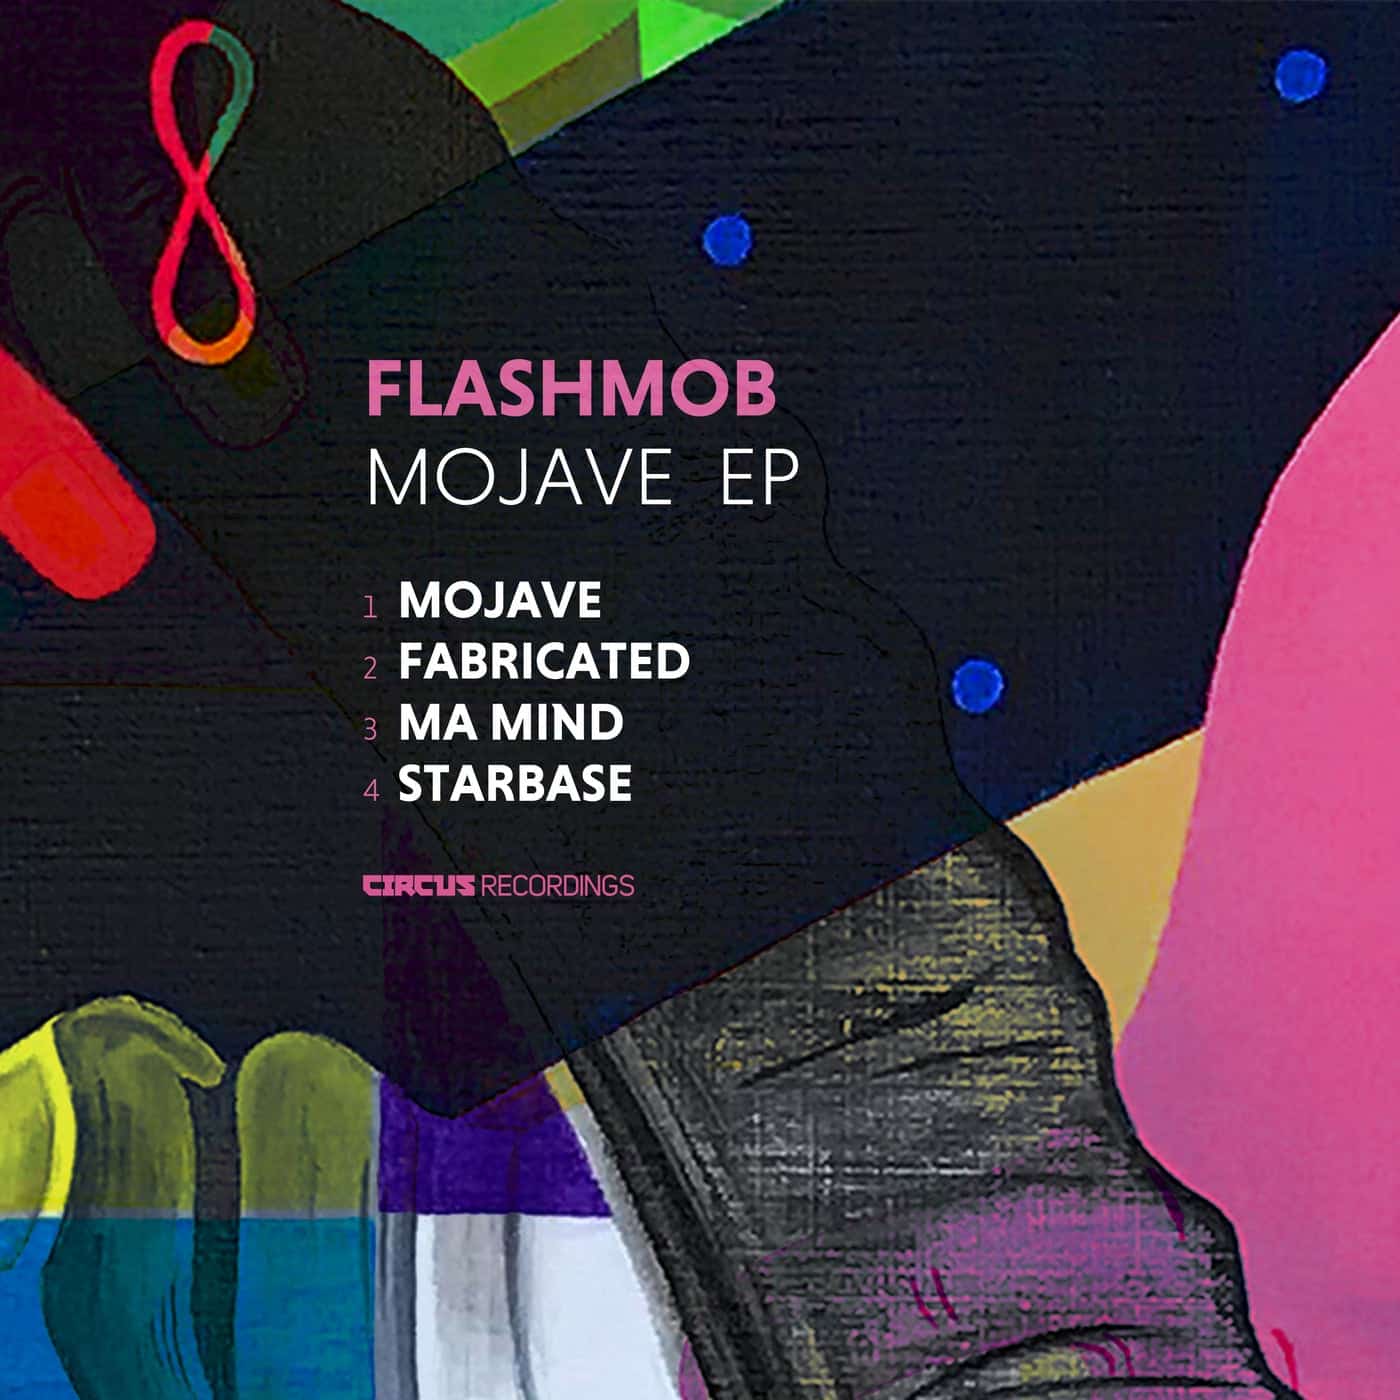 image cover: Mojave EP by Flashmob on Circus Recordings